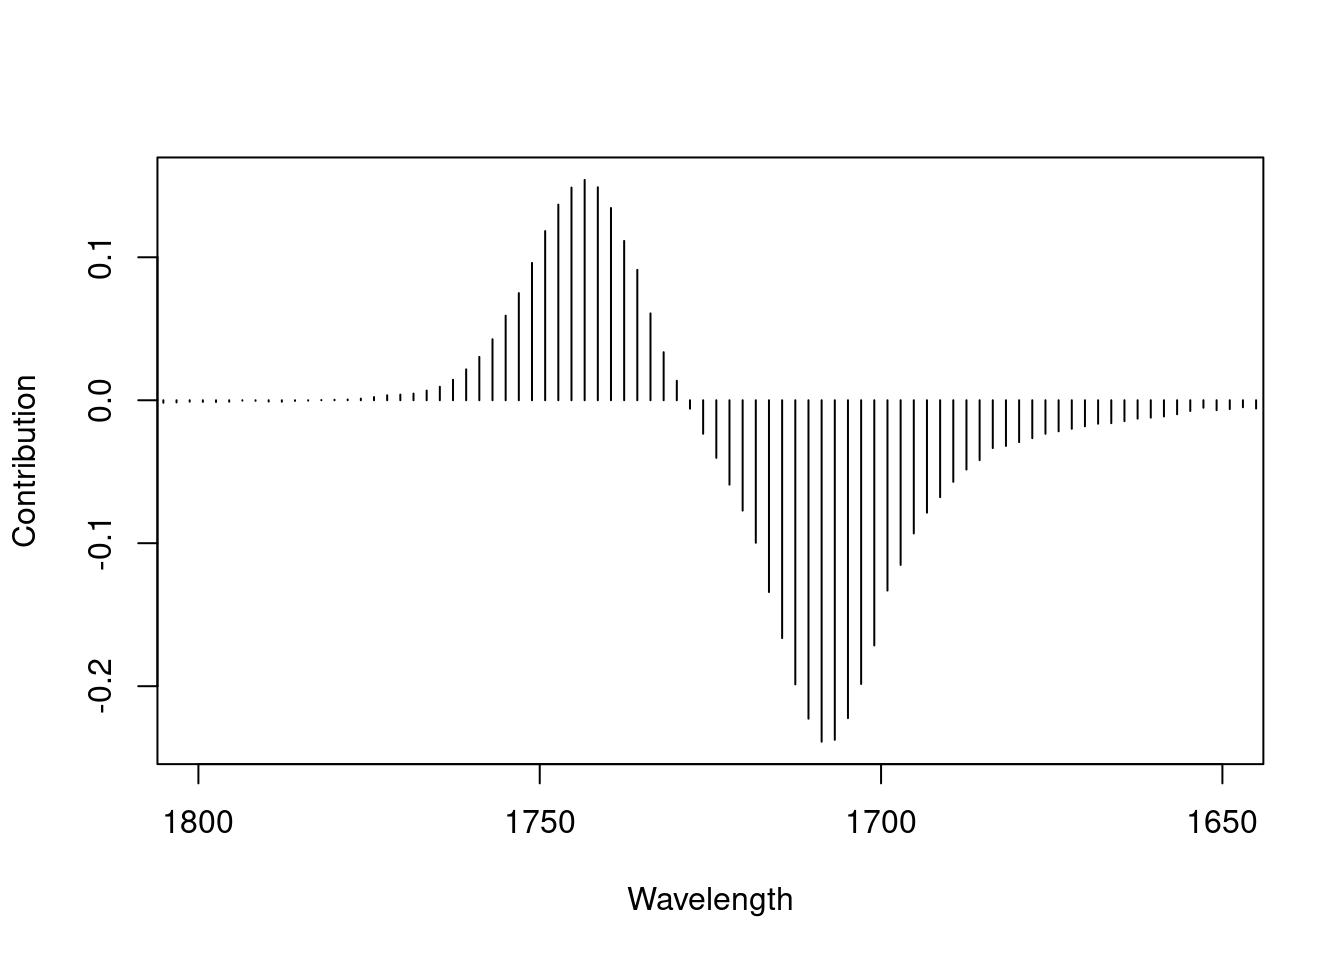 Loadings plot for PC 1 from PCA on the IR data set, carbonyl region, shown as a bar plot.